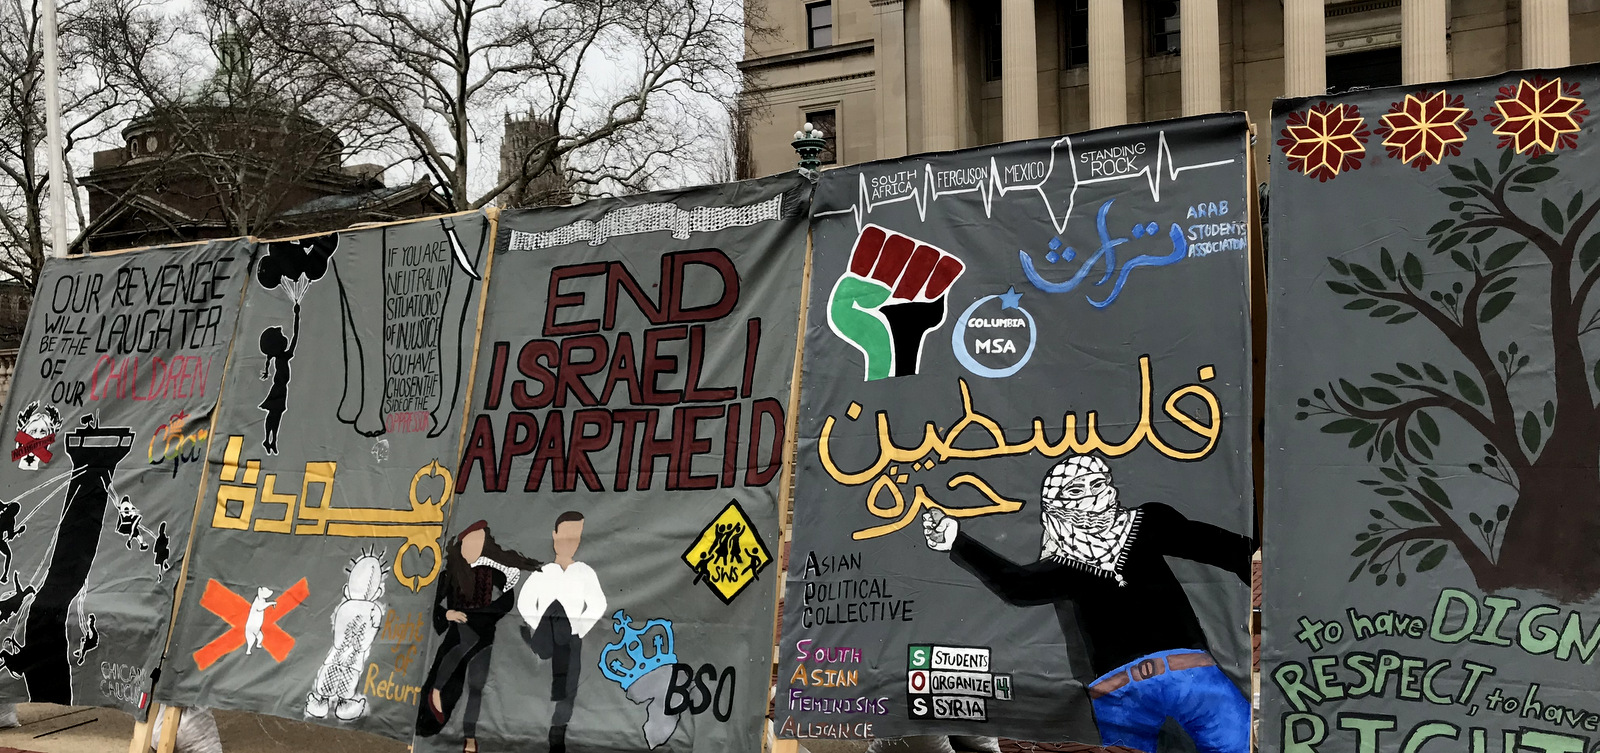 A display erected by students at Barnard College and Columbia University in protest of Israeli apartheid. (Photo: Godland)